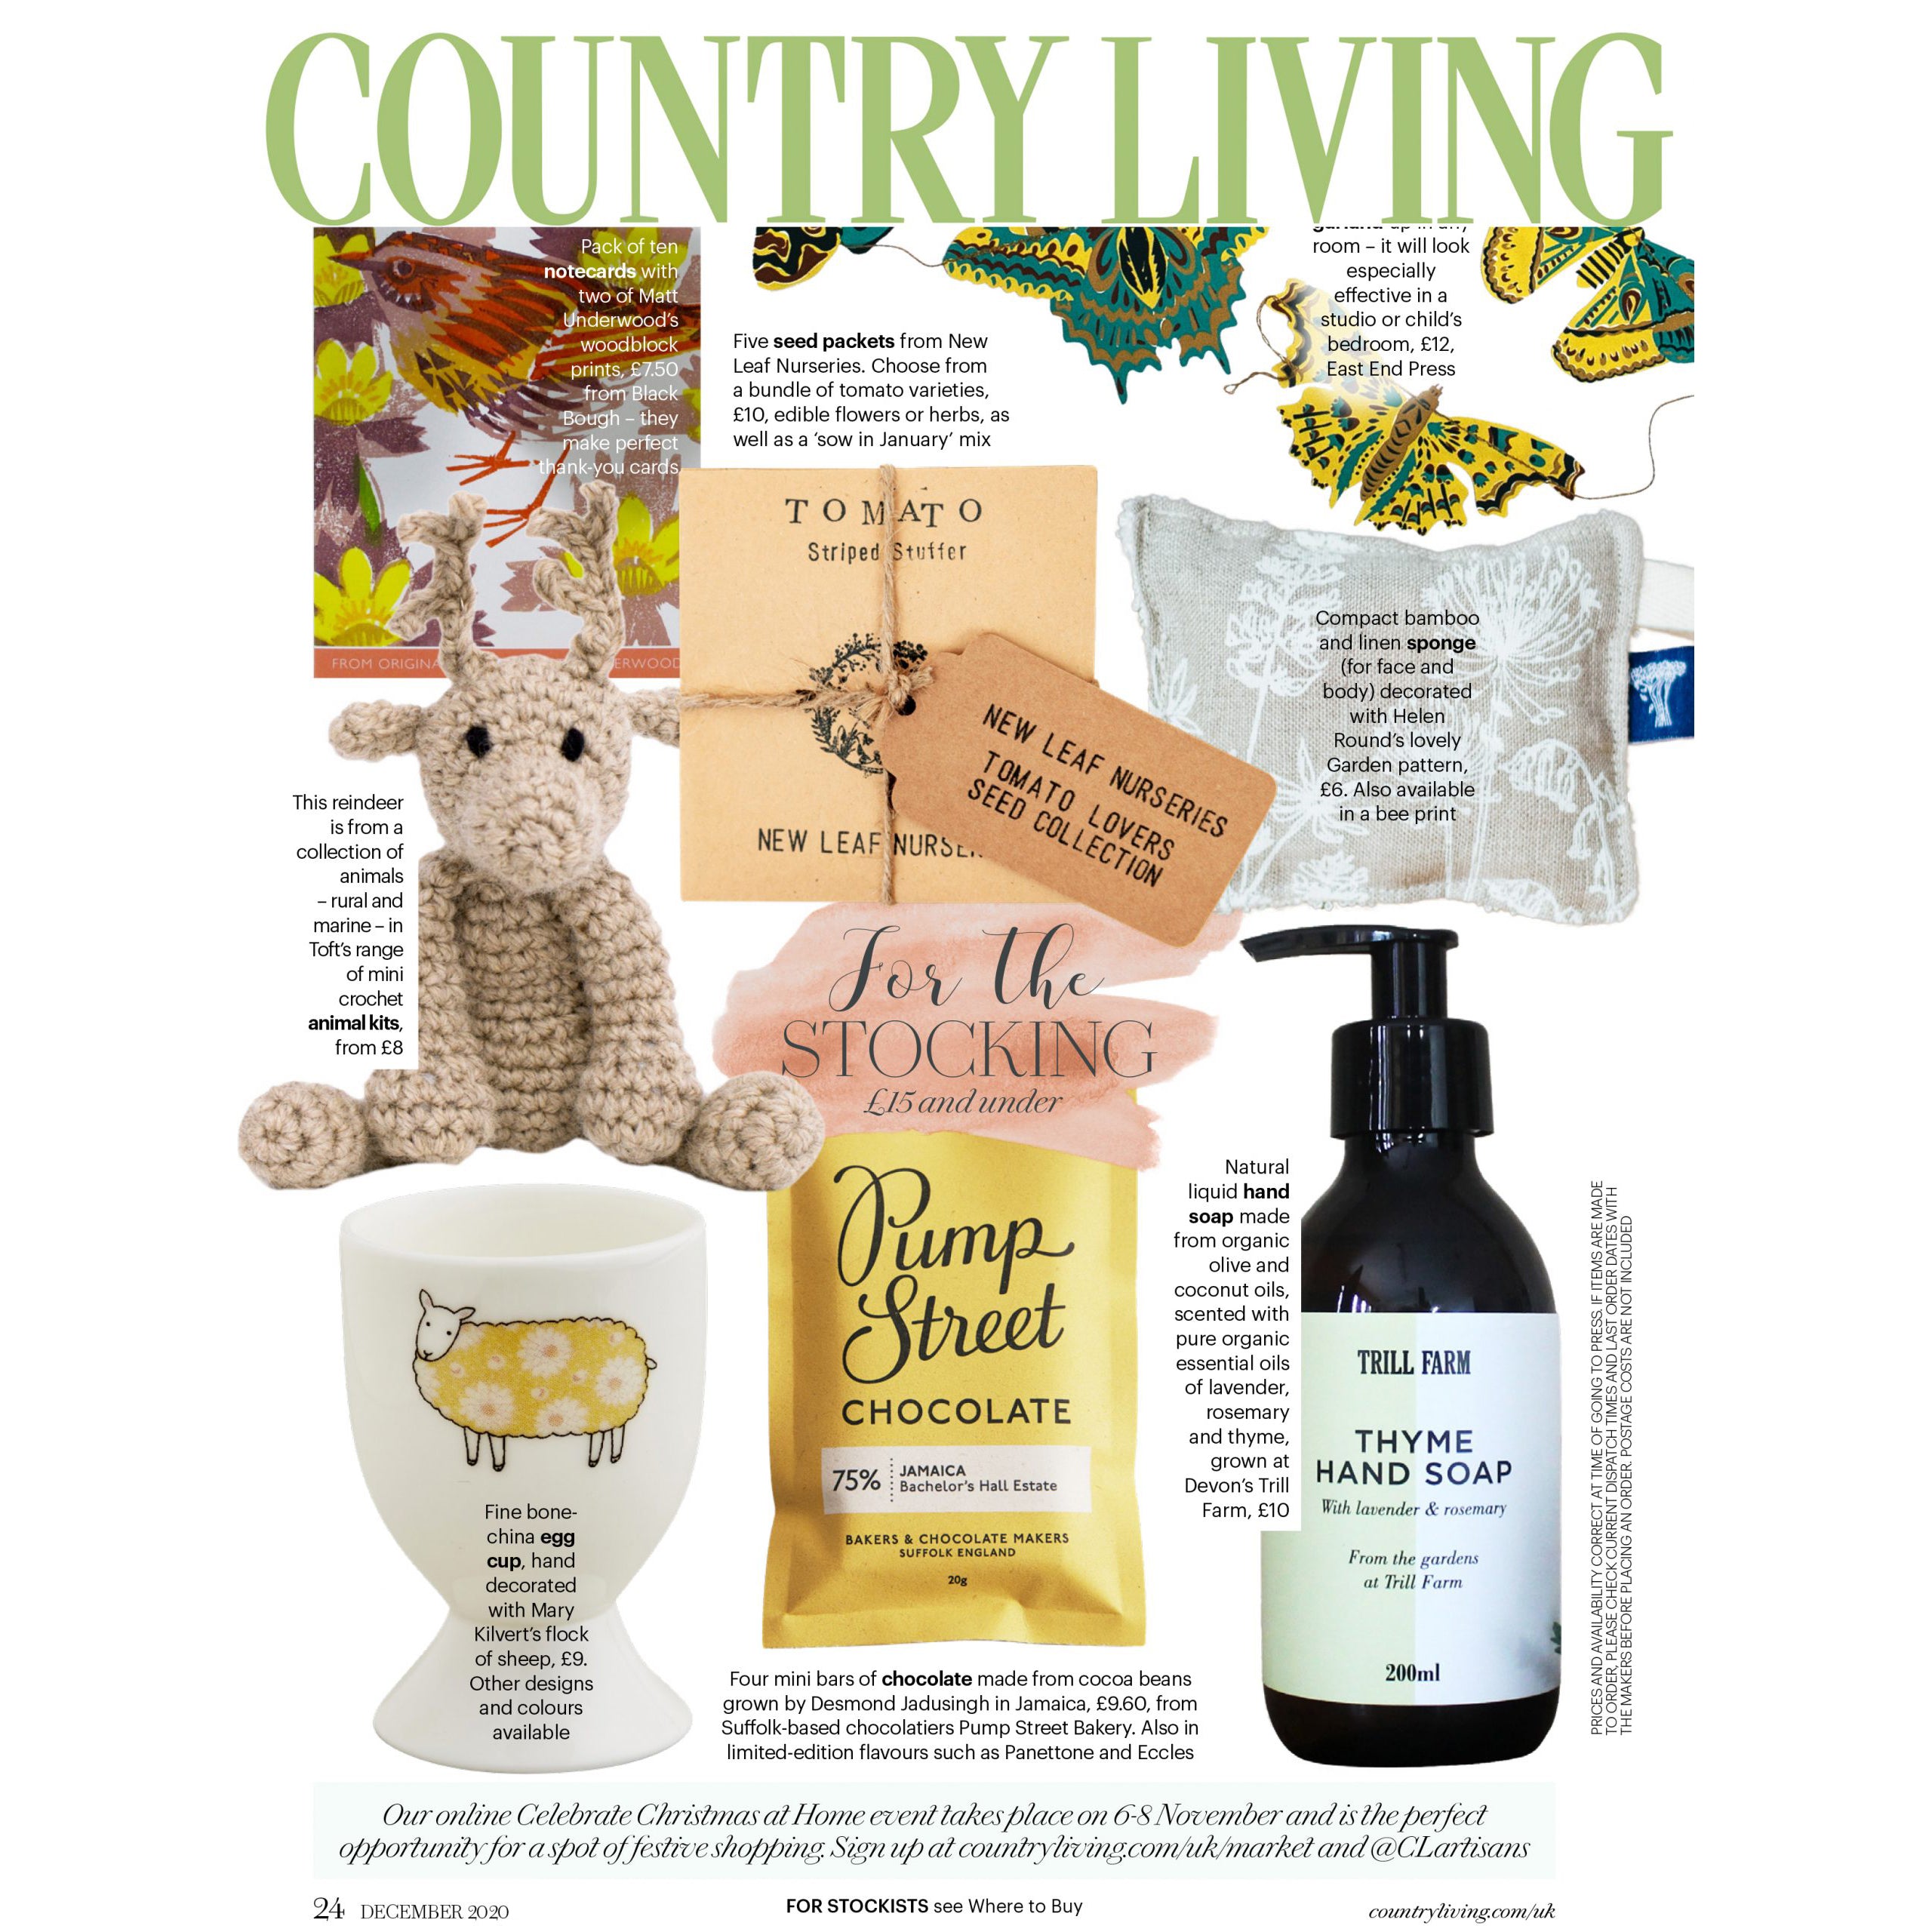 Mary Kilvert's China Sheep Egg Cup featuring in Country Living Magazin